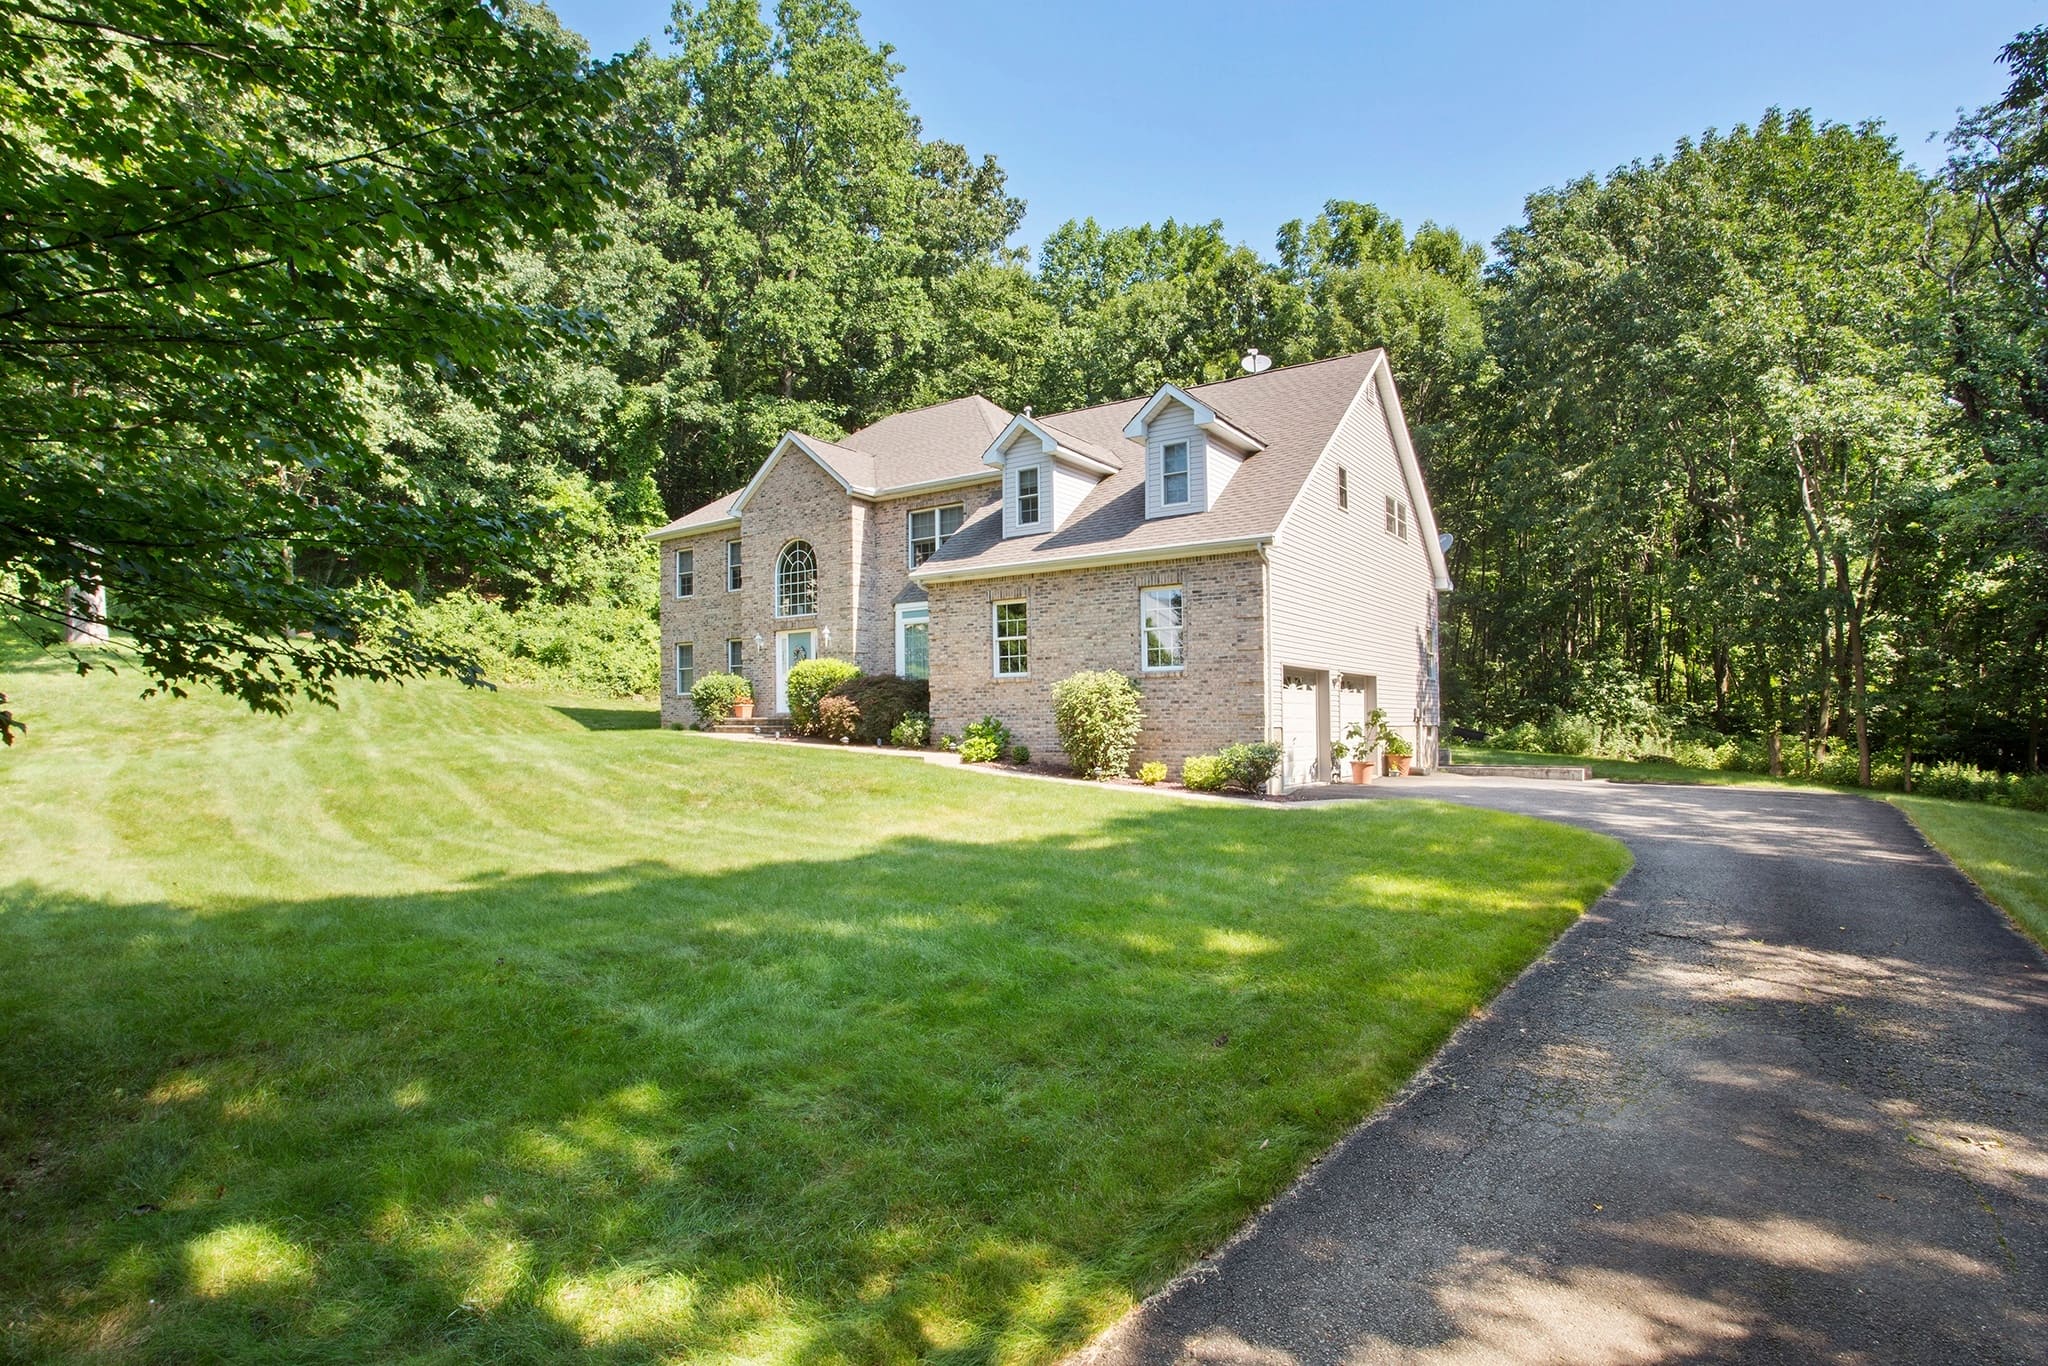 Older, traditional home with asphalt driveway leading up to the garage